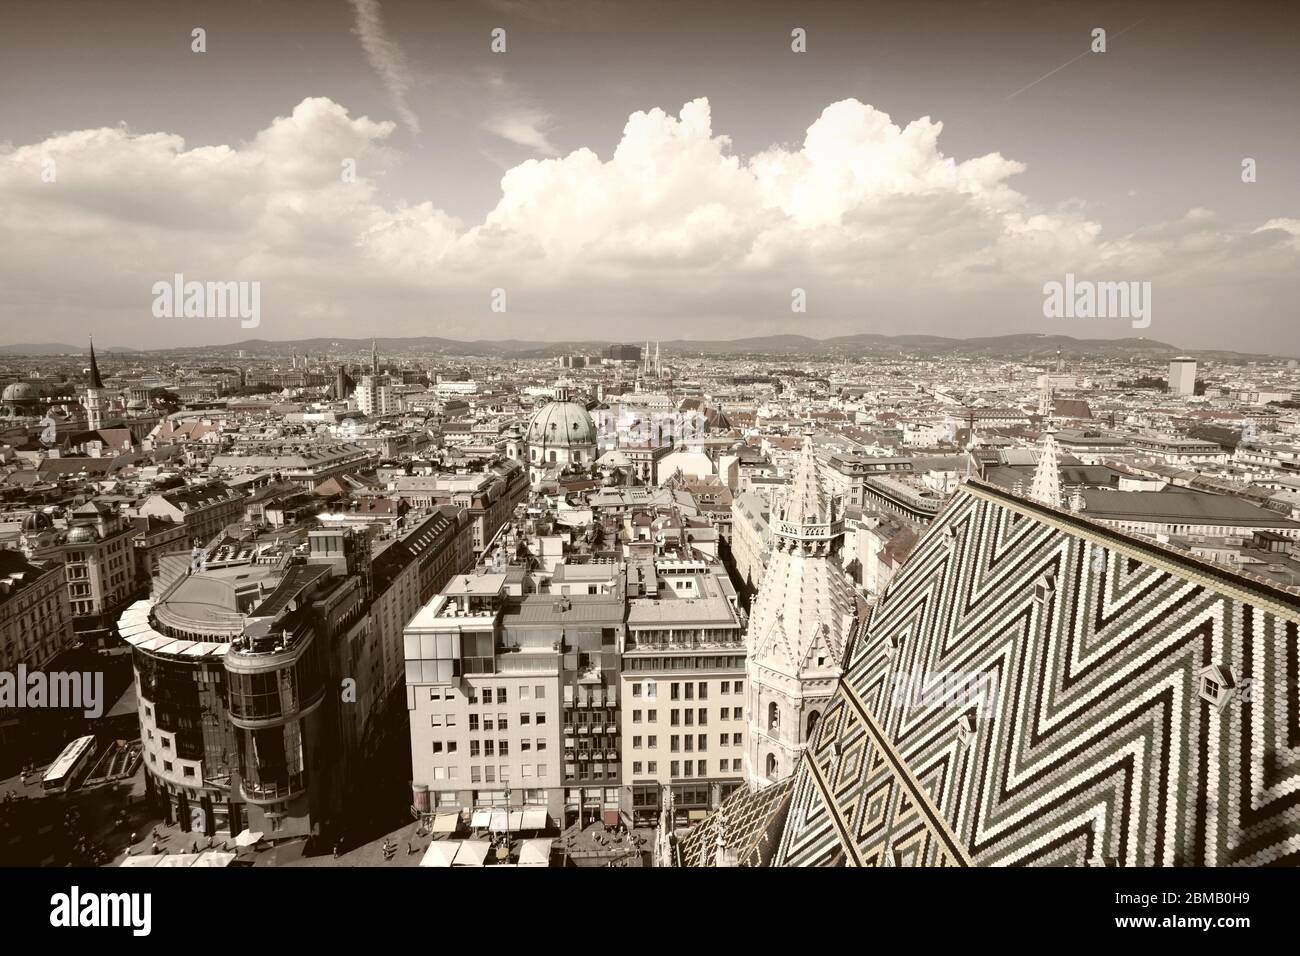 Vienna, Austria - aerial view of the cathedral and the Old Town, a UNESCO World Heritage Site. Sepia tone - retro monochrome color style. Stock Photo